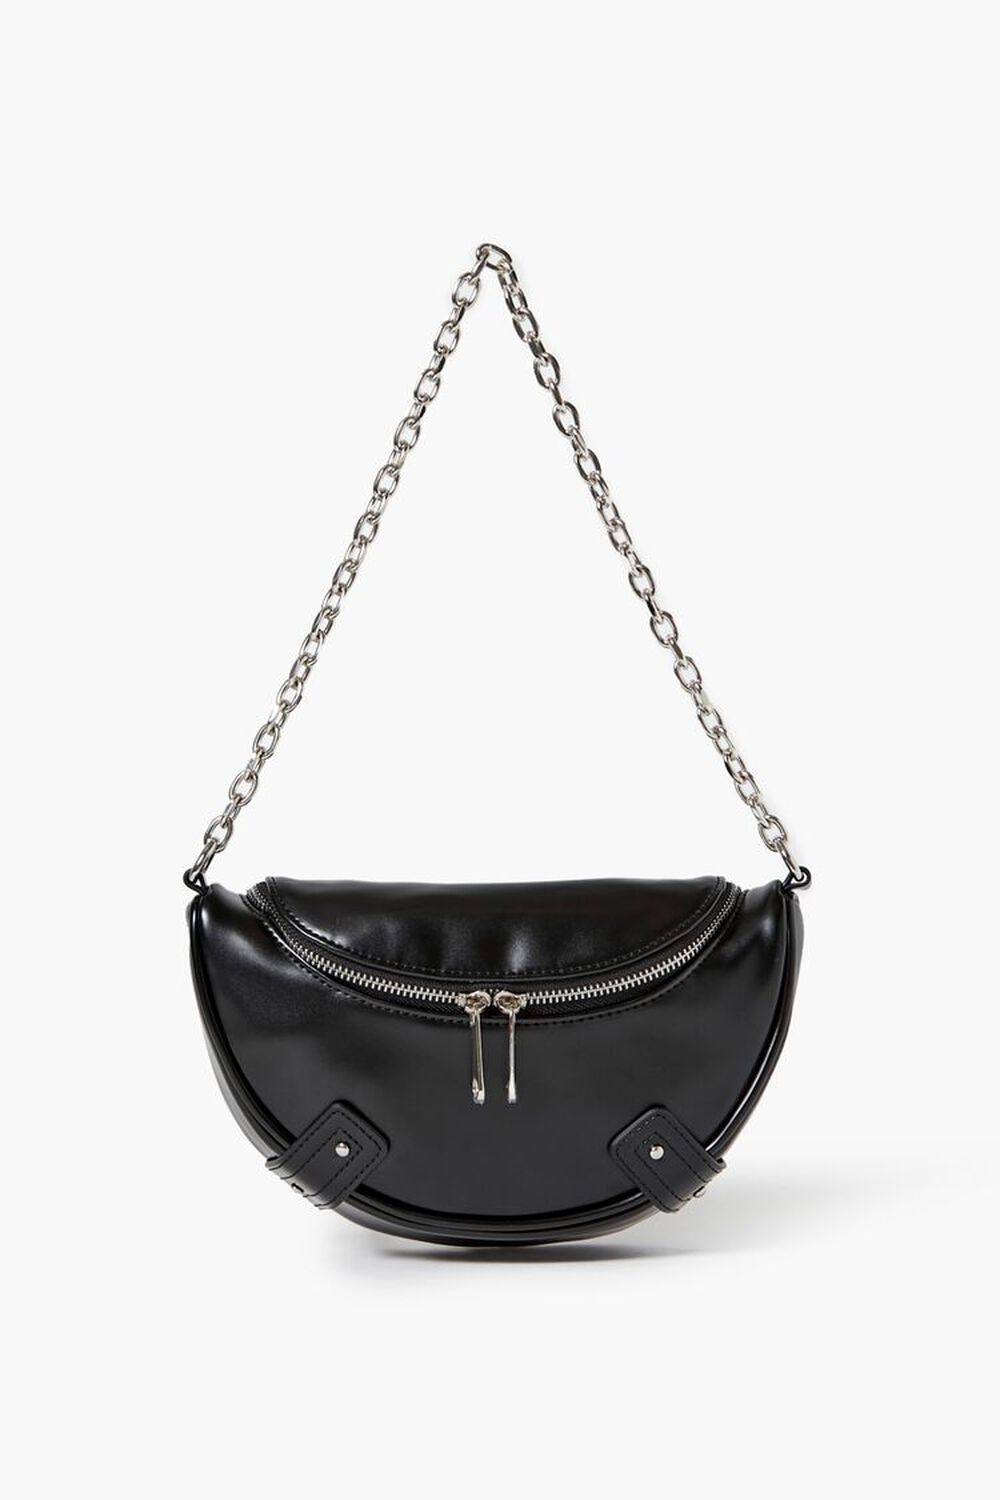 Patent leather bag with chain